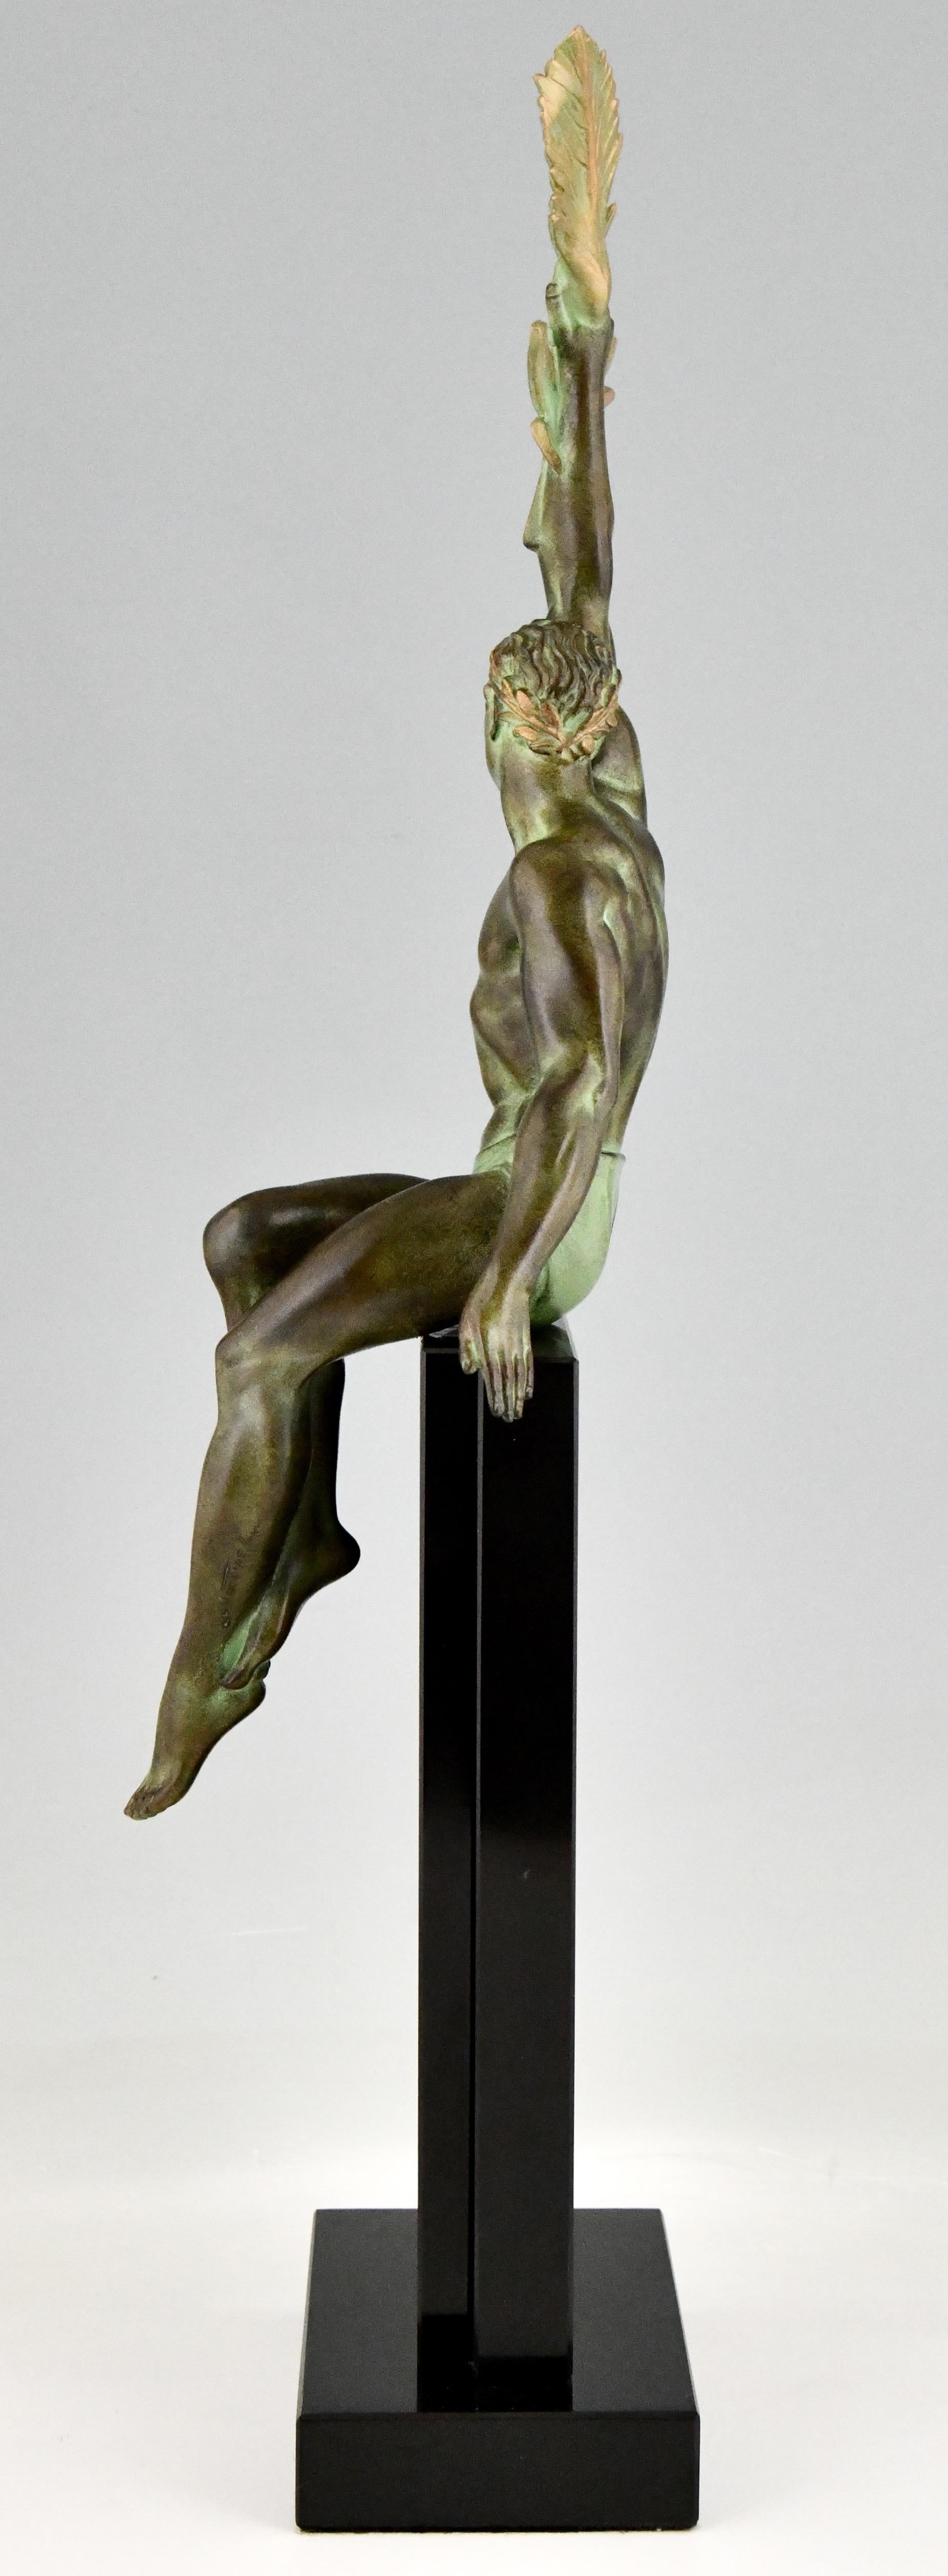 Contemporary Art Deco Style Sculpture Athlete with Palm Leaf by Max Le Verrier, Victory For Sale